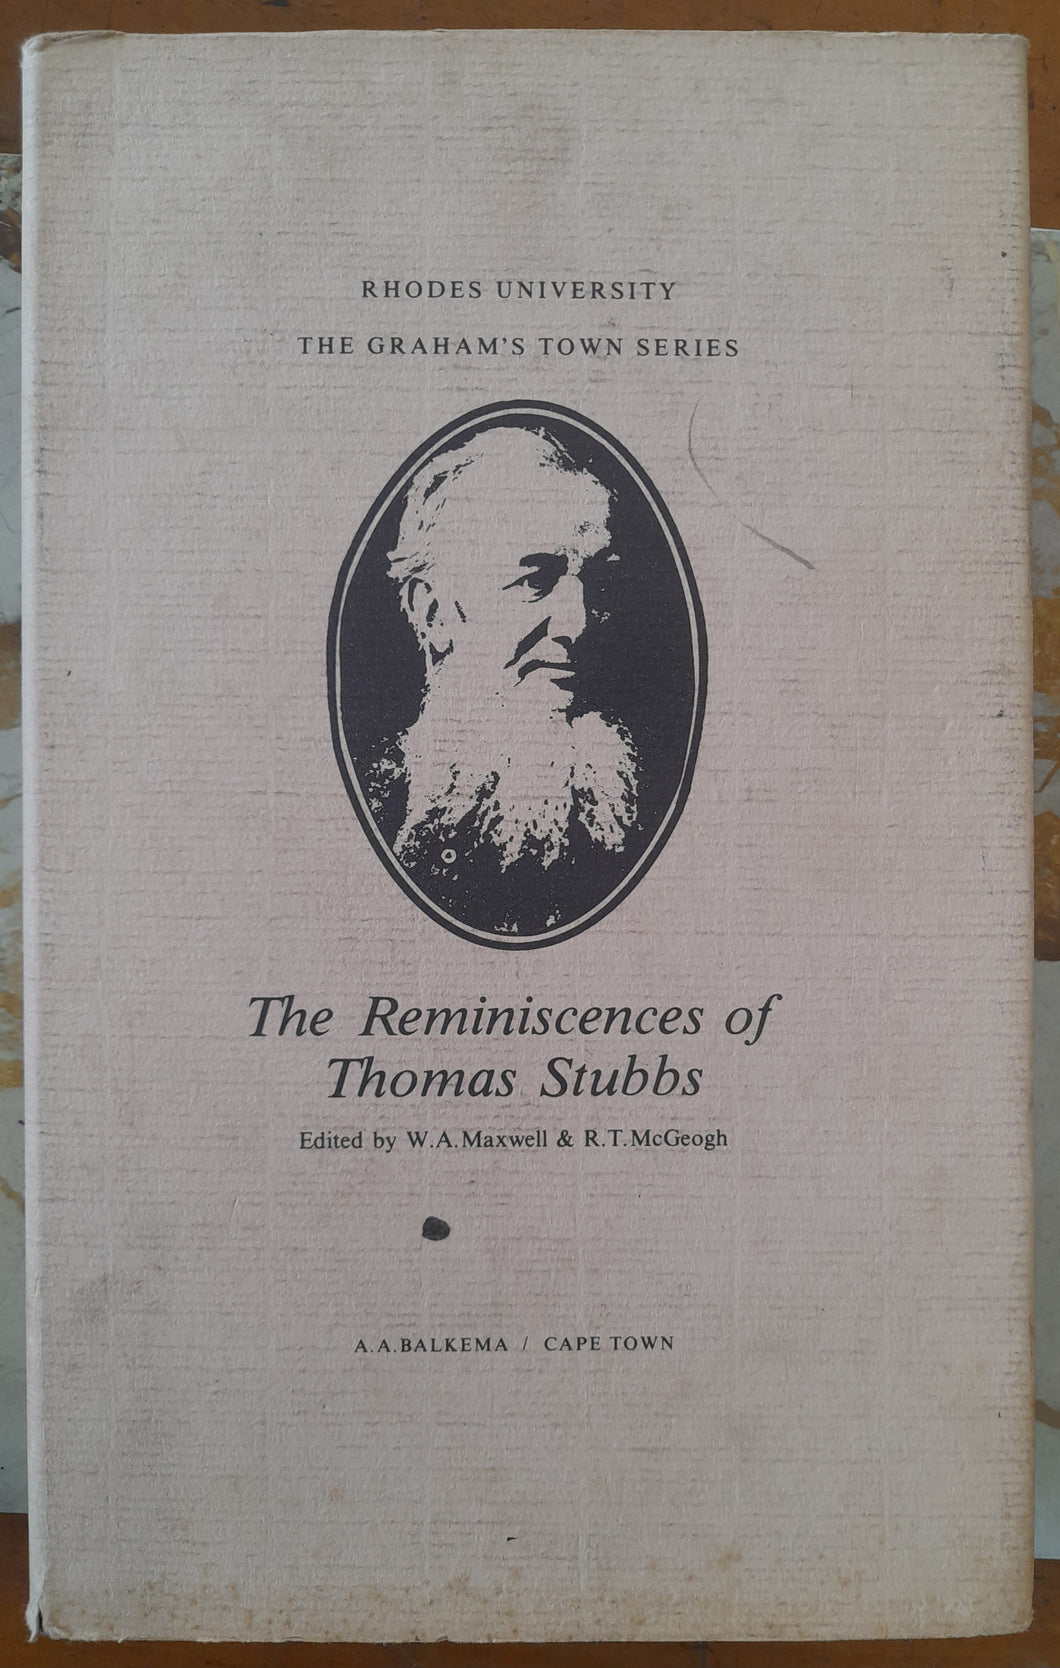 The Reminiscences of Thomas Stubbs - edited by W.A. Maxwell & R.T.McGeogh